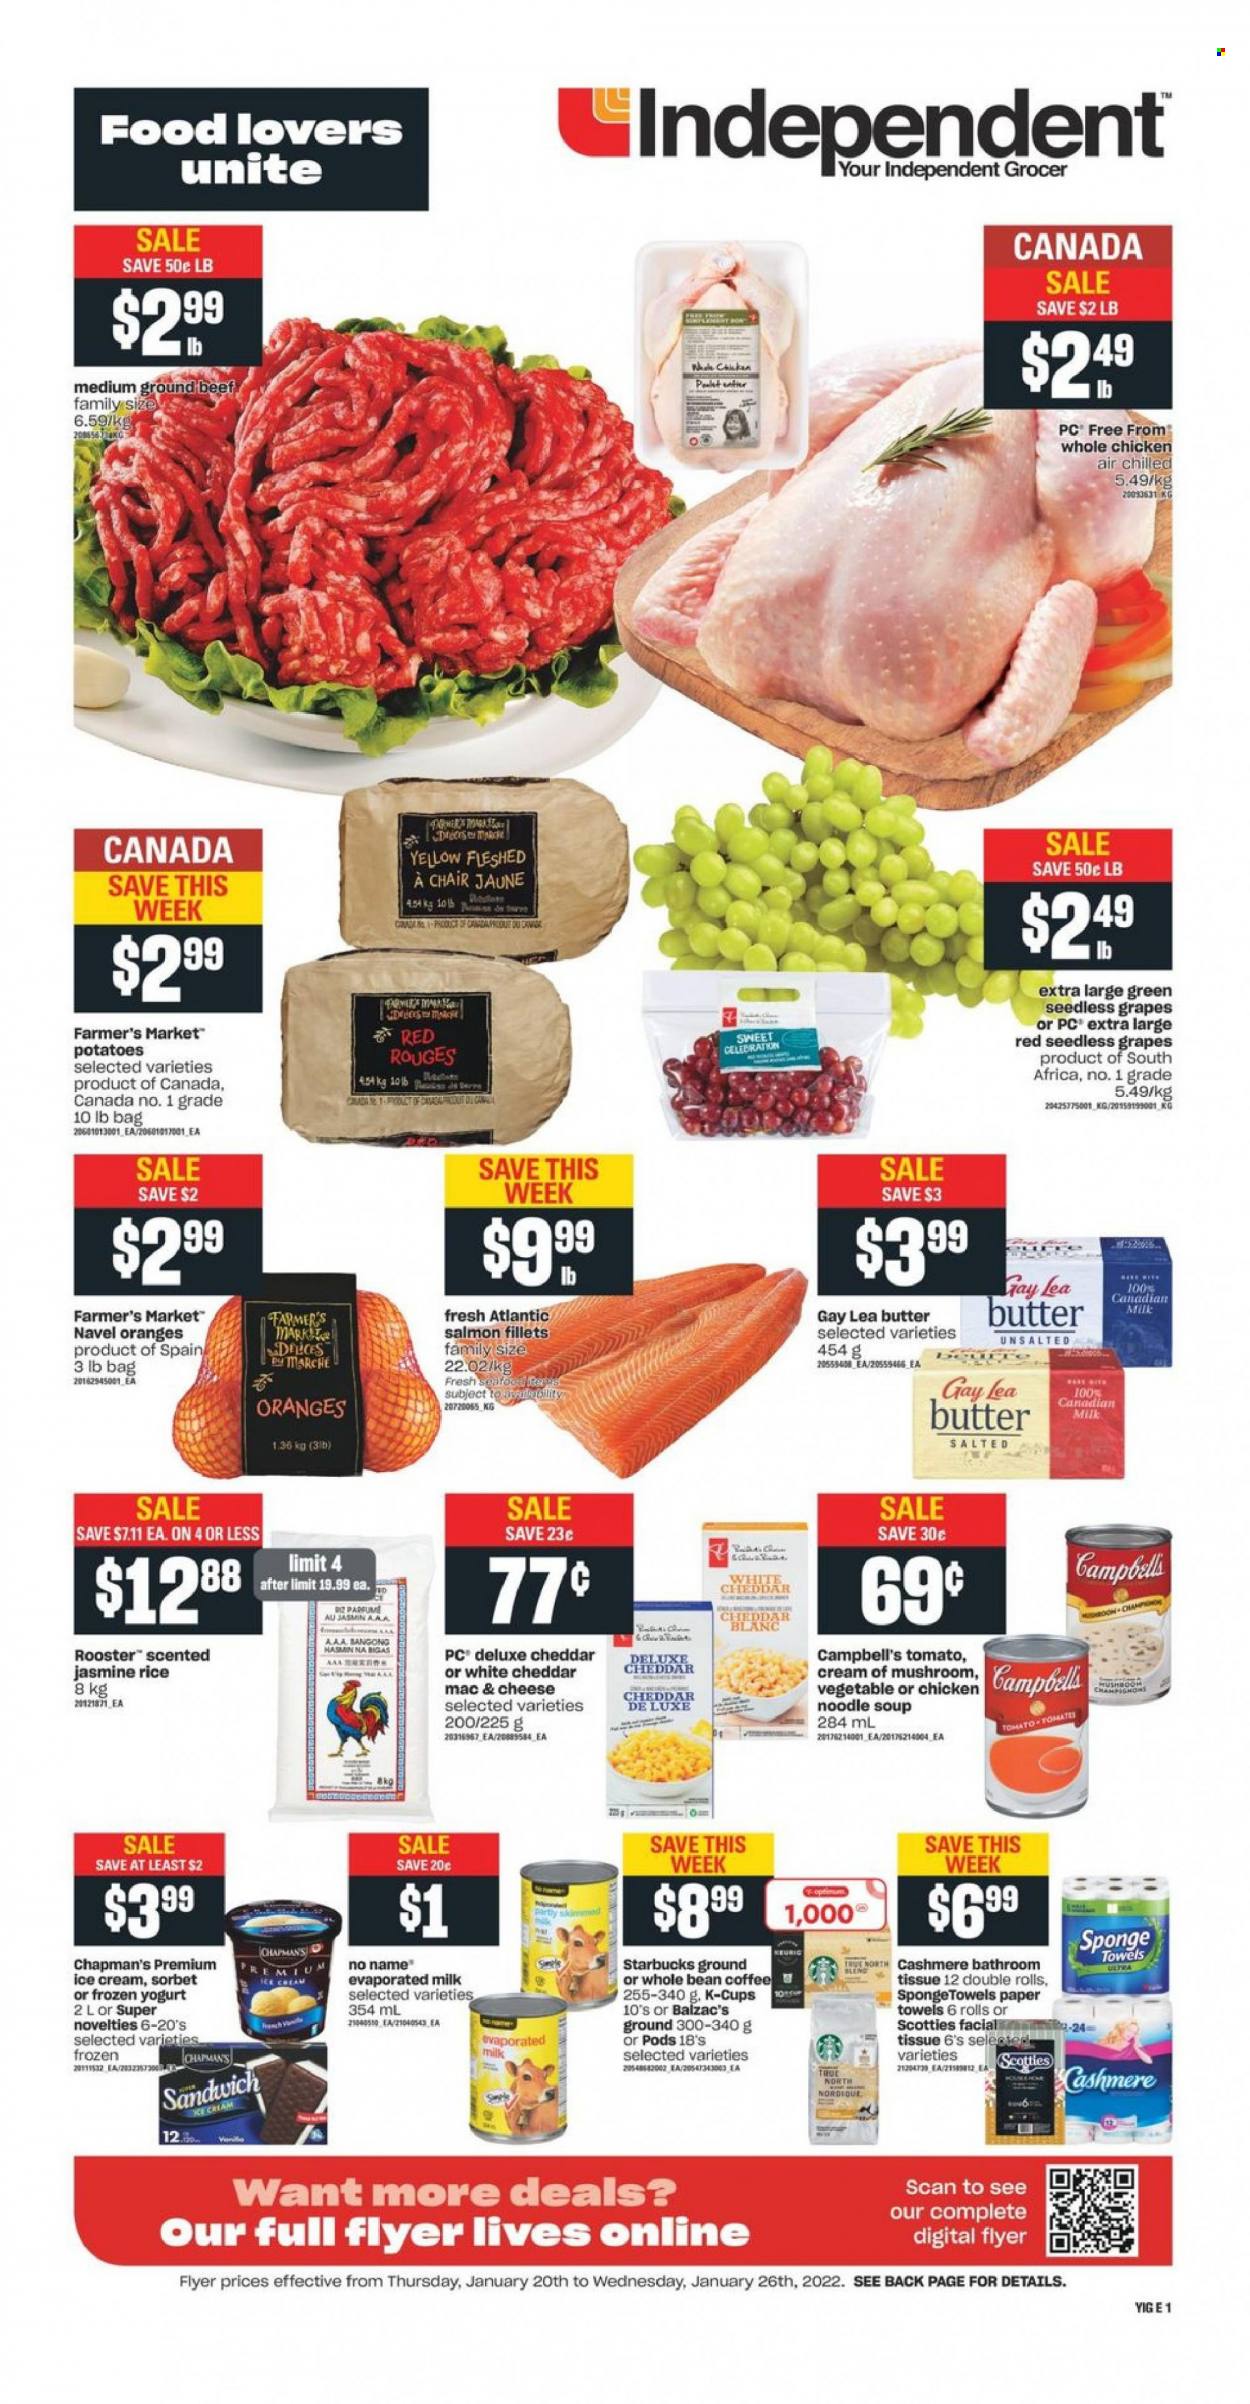 thumbnail - Independent Flyer - January 20, 2022 - January 26, 2022 - Sales products - potatoes, grapes, seedless grapes, navel oranges, salmon, salmon fillet, No Name, Campbell's, sandwich, soup, noodles cup, noodles, cheddar, yoghurt, evaporated milk, butter, ice cream, Celebration, rice, jasmine rice, coffee, coffee capsules, Starbucks, K-Cups, whole chicken, chicken, beef meat, ground beef, bath tissue, kitchen towels, paper towels, sponge, oranges. Page 1.